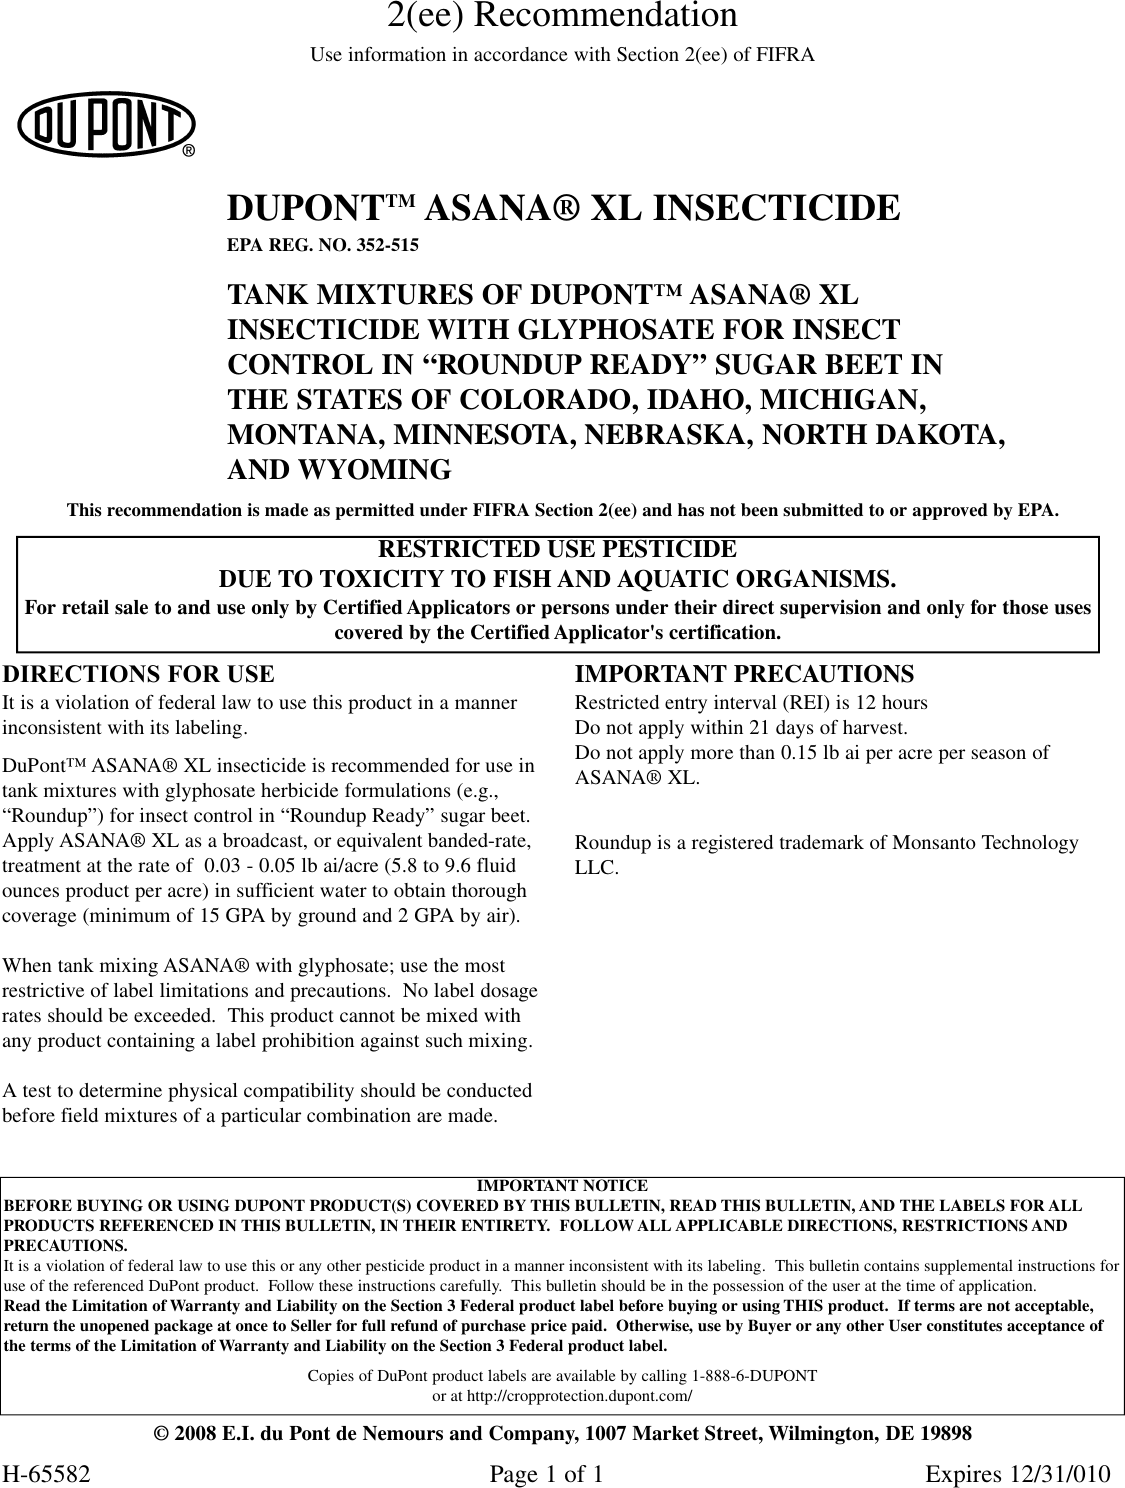 Dupont Authentication Xl Insecticide Users Manual Asana